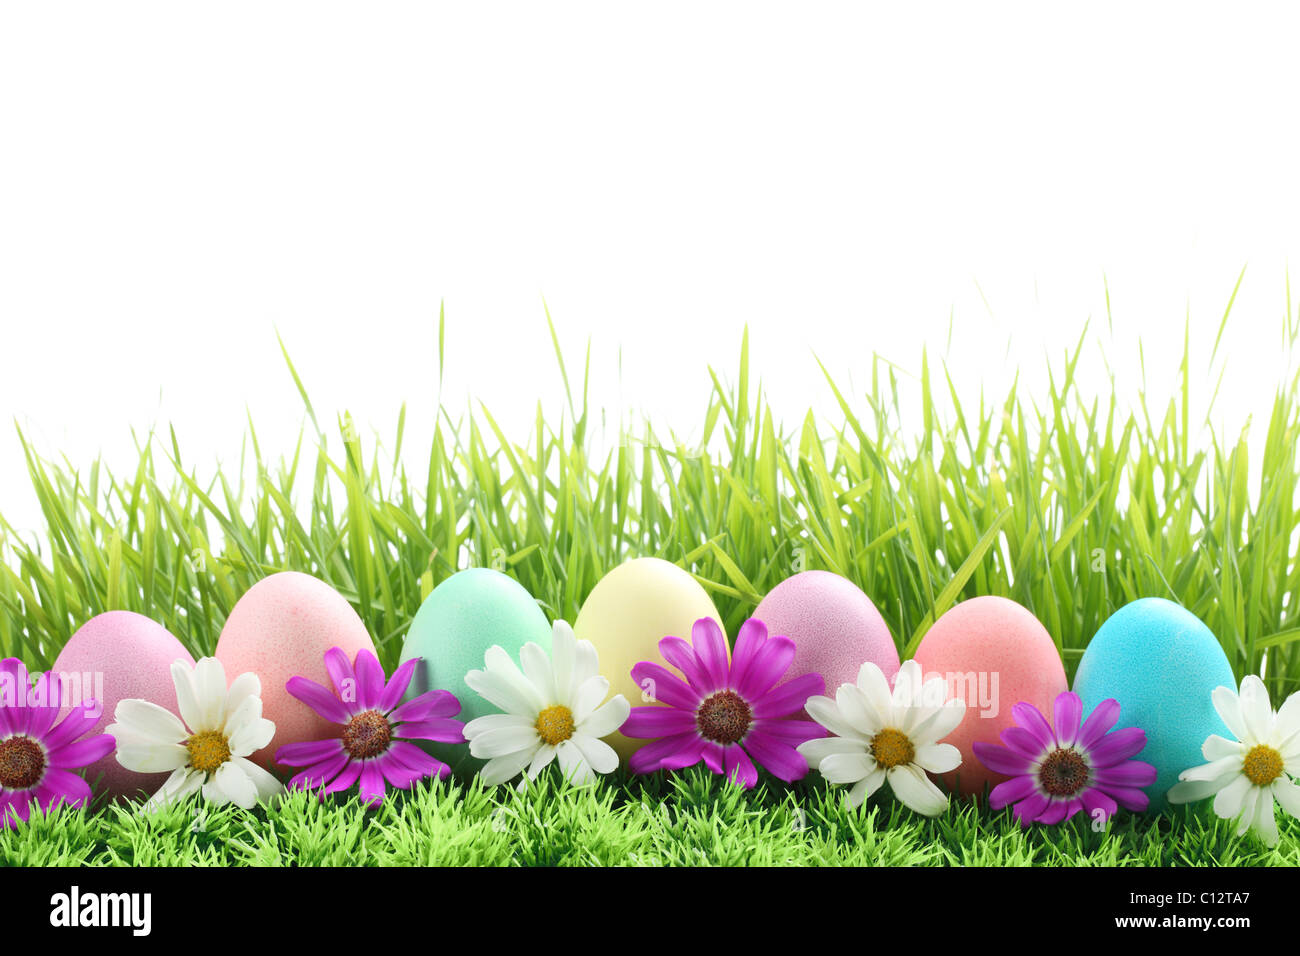 Row of Easter Eggs with Daisy on Fresh Green Grass Stock Photo